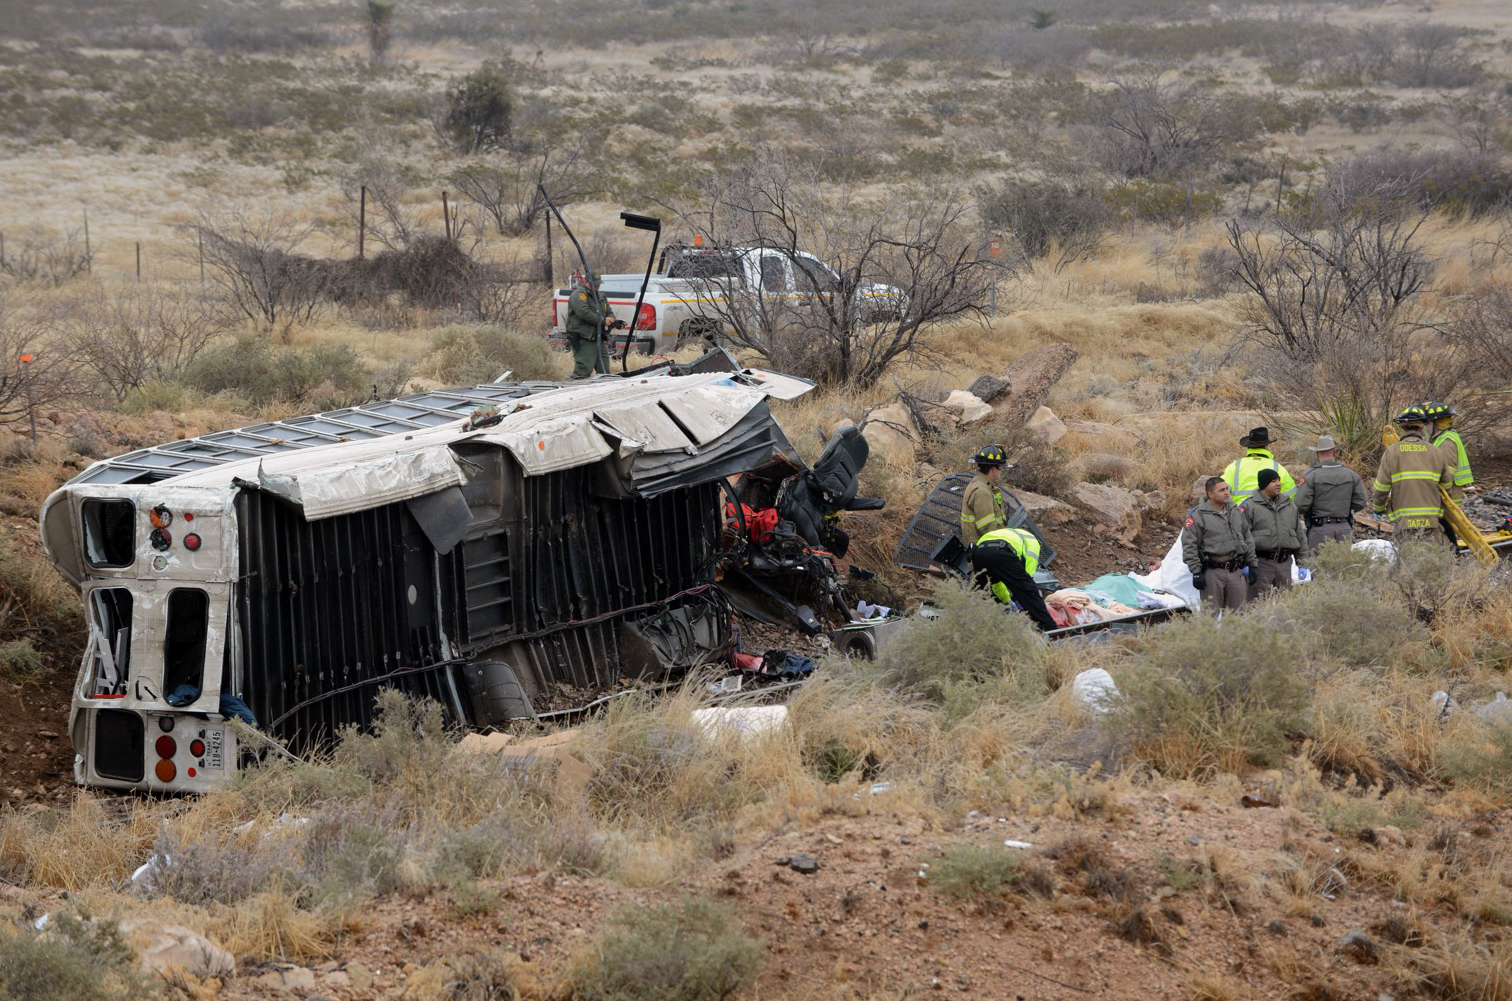 10 killed as prison bus collides with train in West Texas